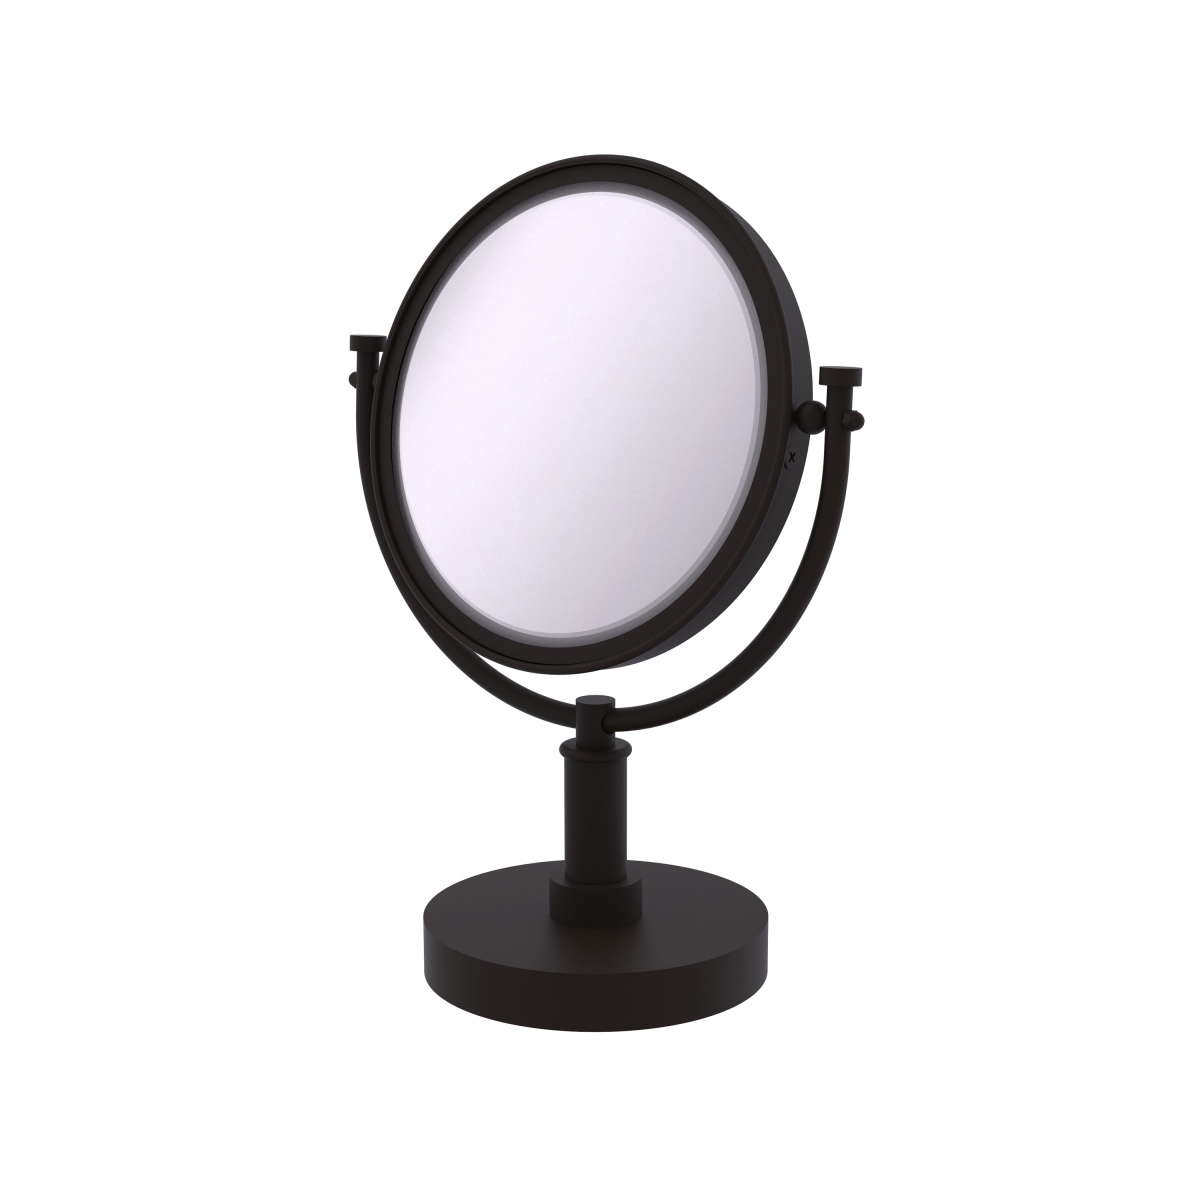 Dm-4-3x-orb Smooth Ring Style 8 In. Vanity Top Make-up Mirror 3x Magnification, Oil Rubbed Bronze